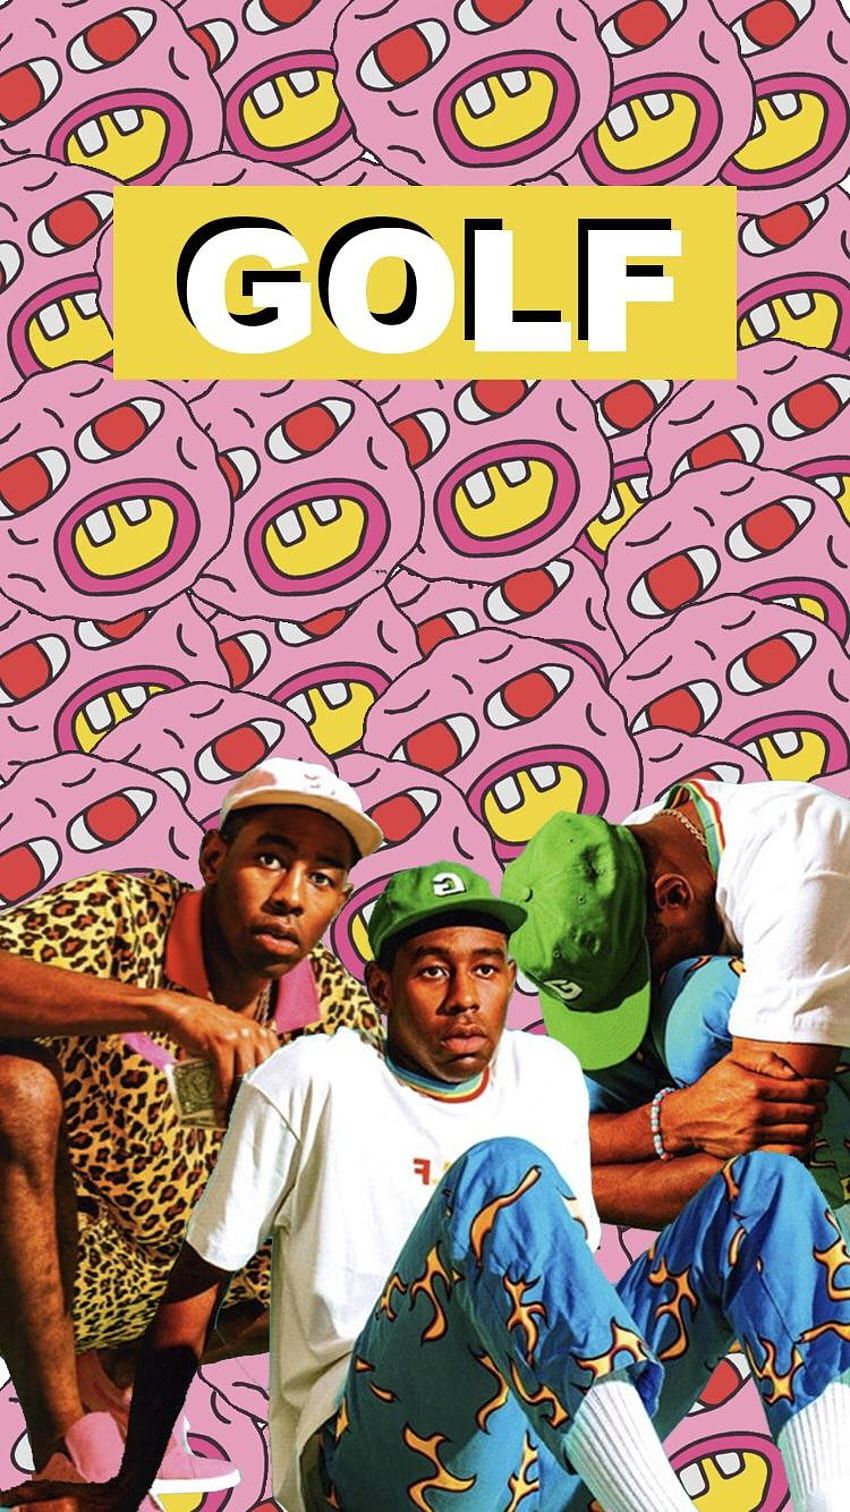 IPhone I made in PS : tylerthecreator, Kali Uchis HD phone wallpaper